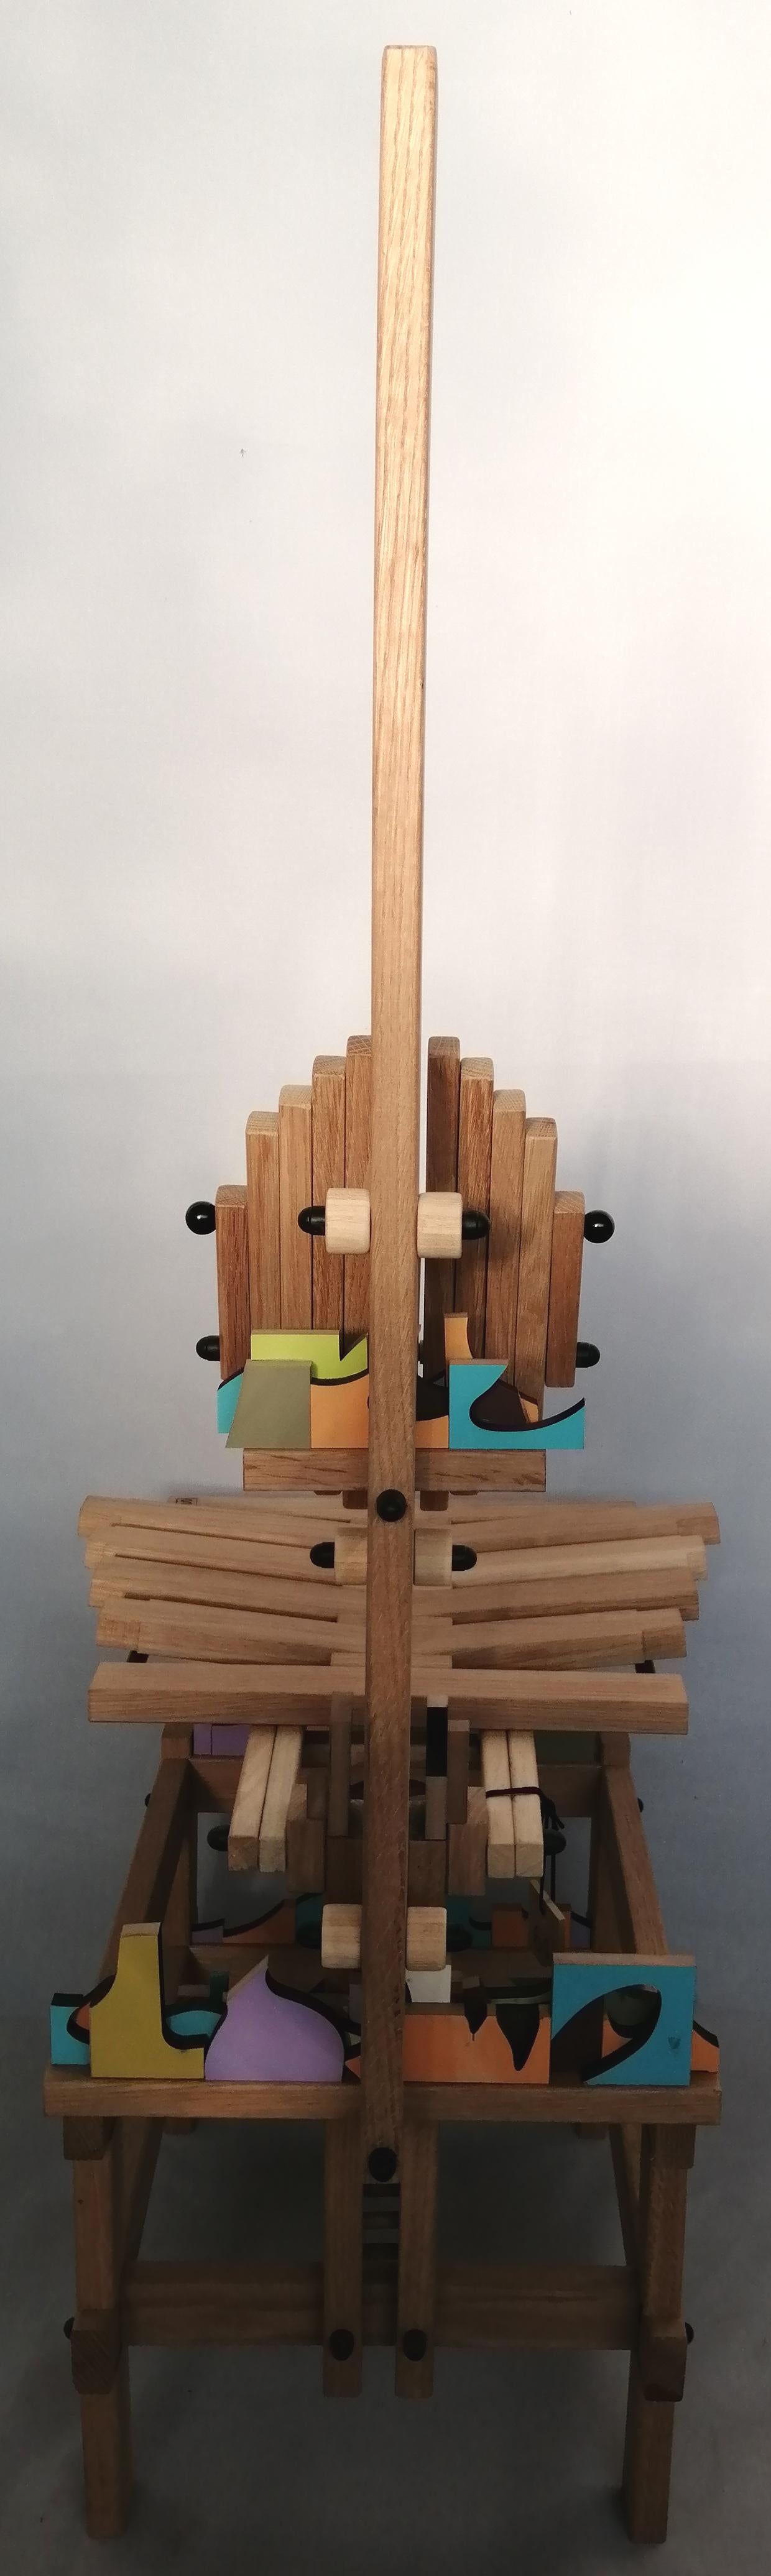 Hand-Crafted Chair For Sale